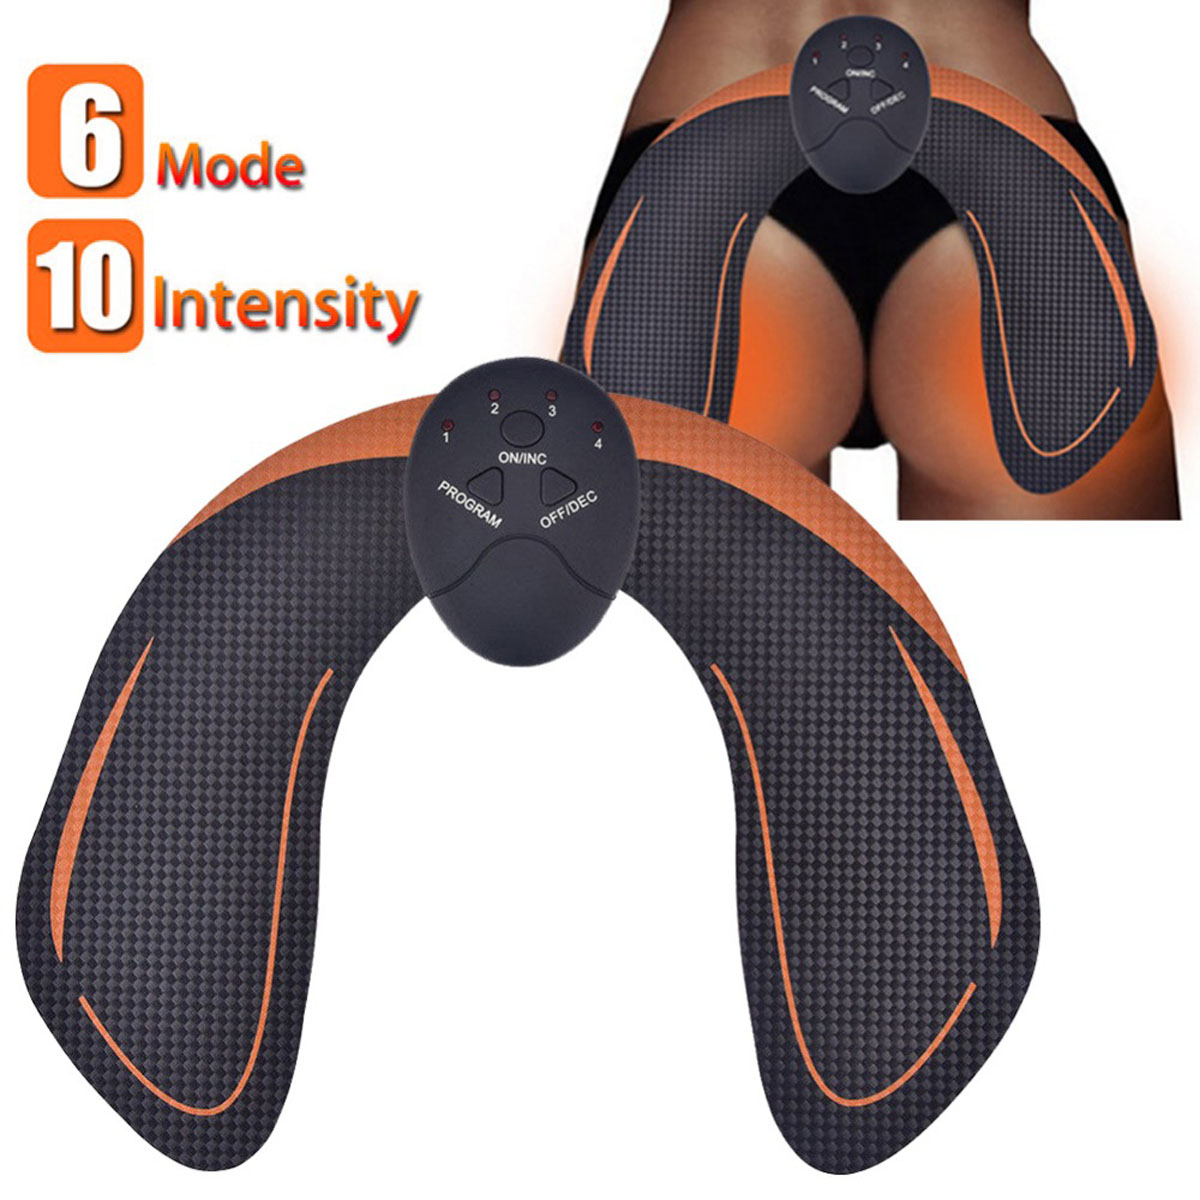 EMS-Smart-Hip-Waist-Trainer-6-Modes-10-Levels-Butt-Lifting-Muscle-Fitness-Slimming-Device-1719608-3